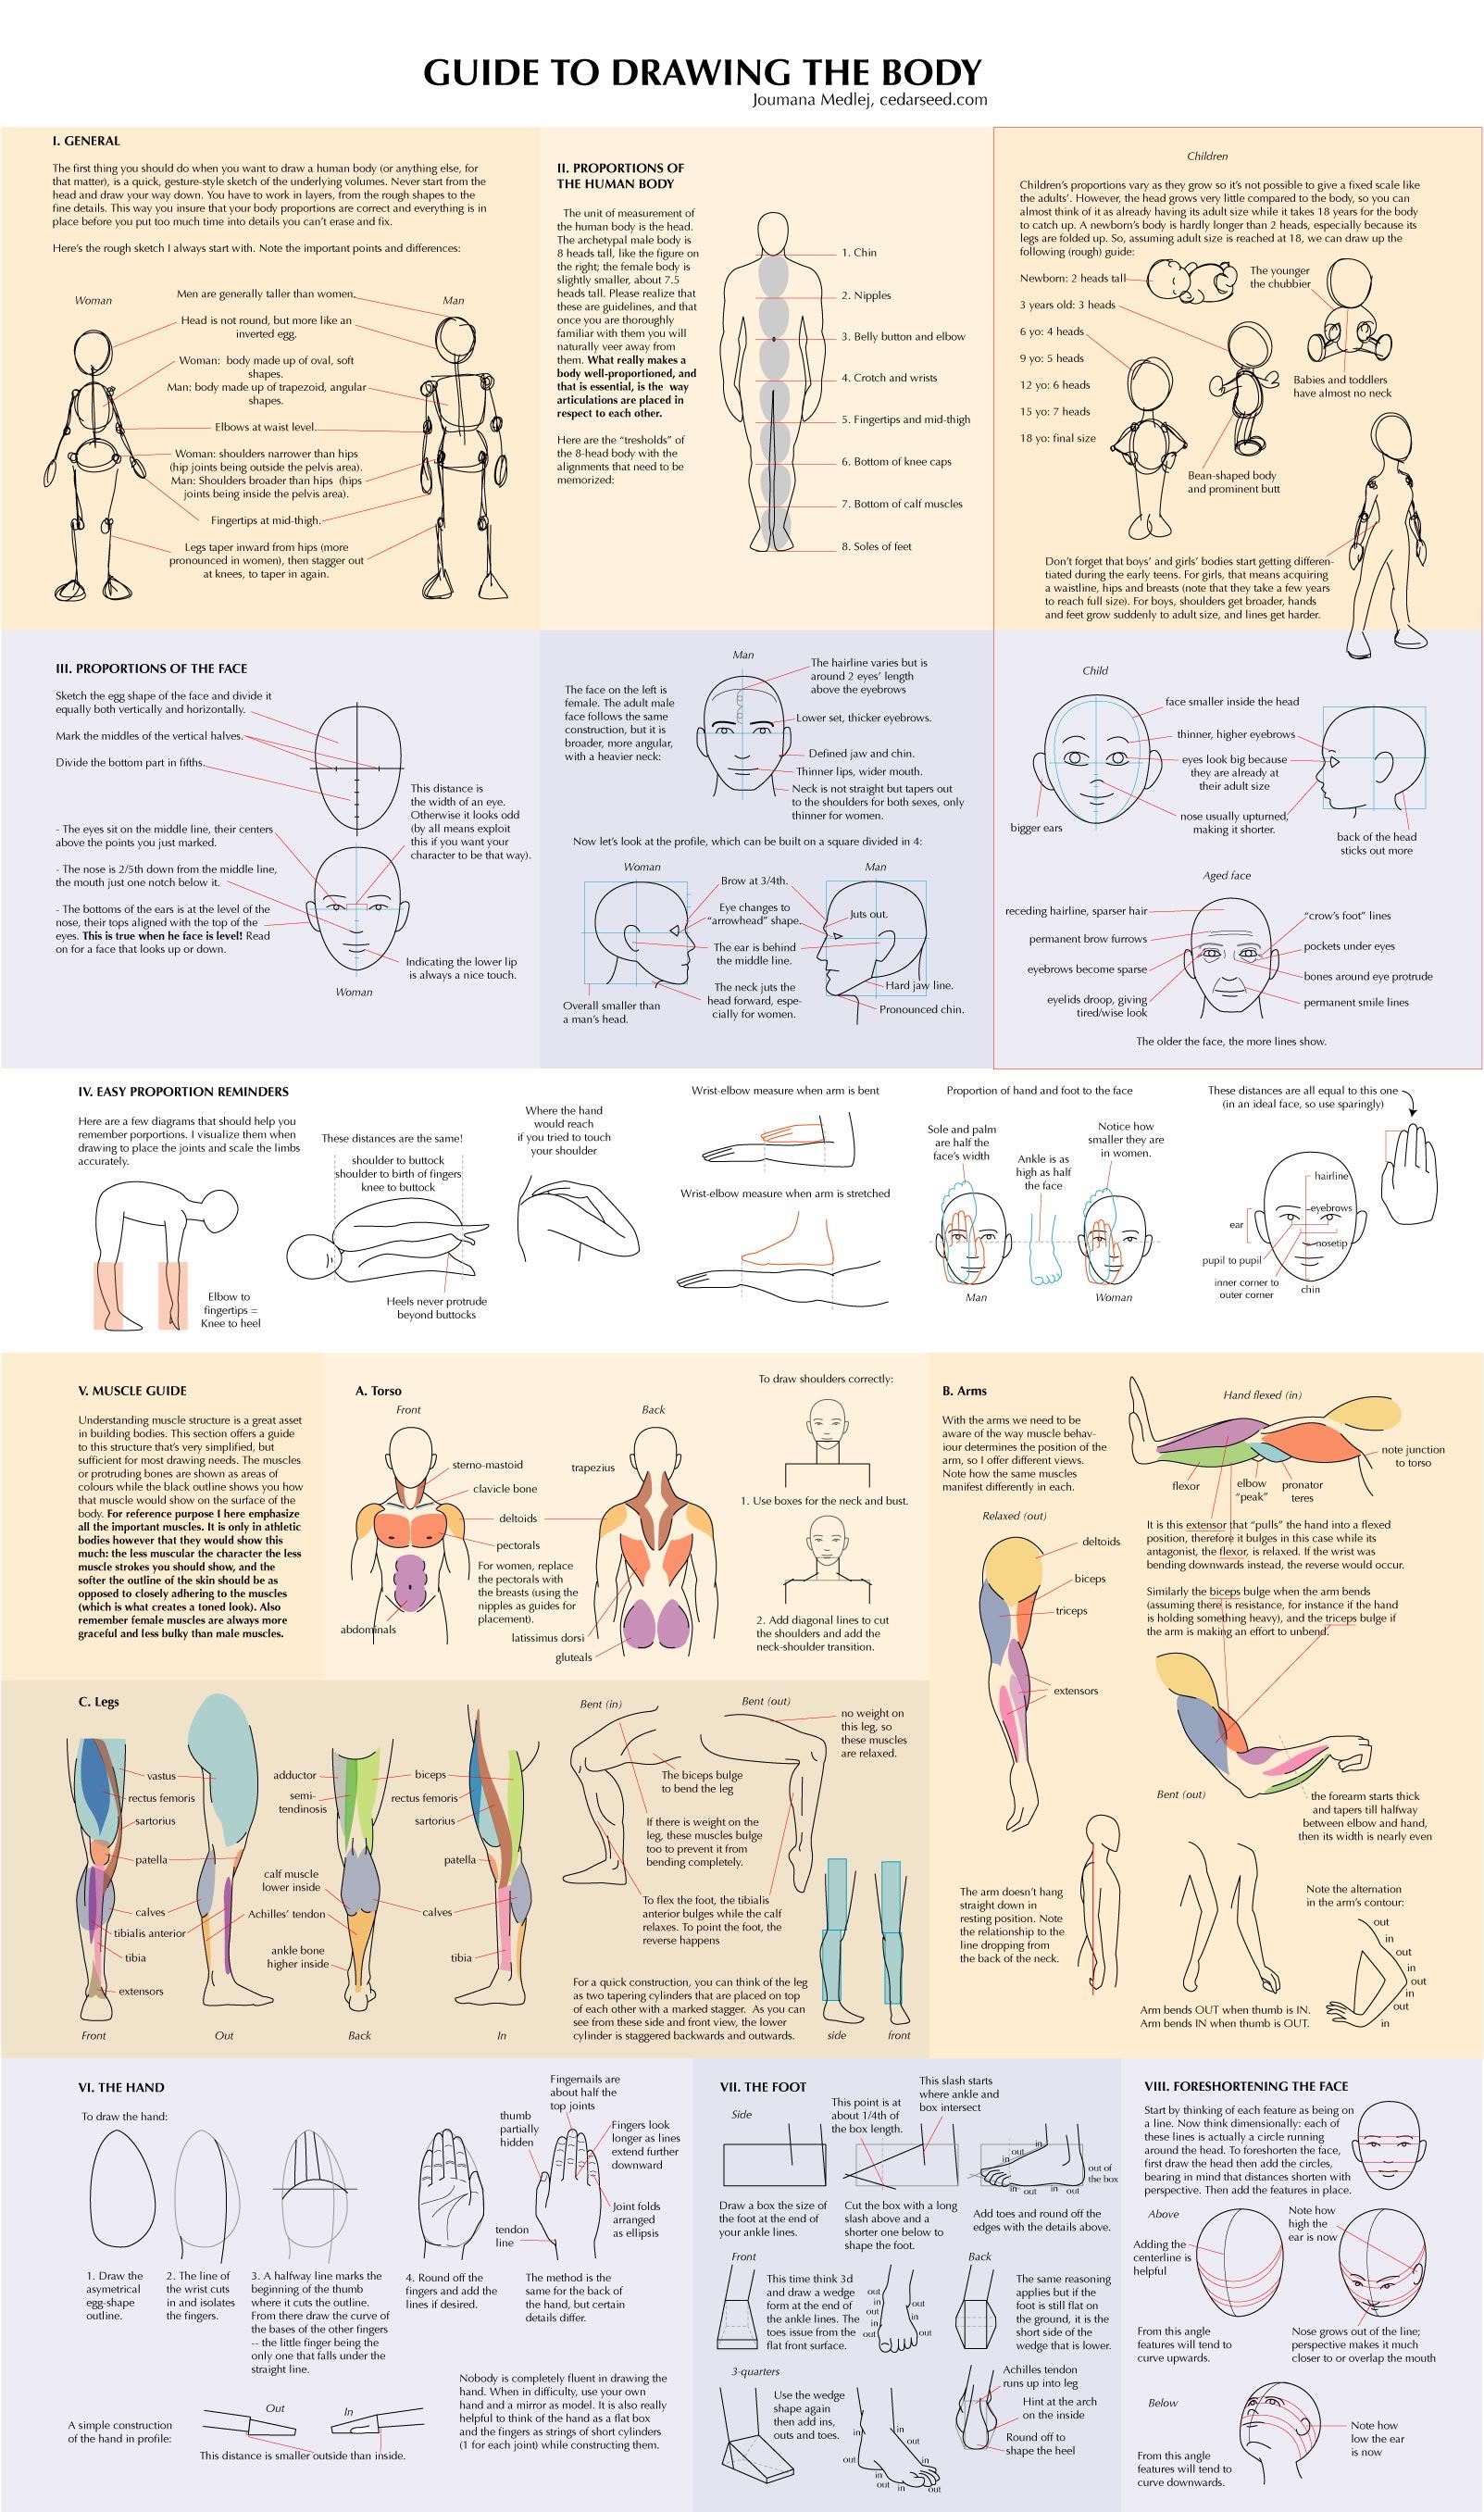 Drawing a human body needs guide specially for the beginners. You need to know the proportion of the human body, proportion of the face and its easy reminders for you […]